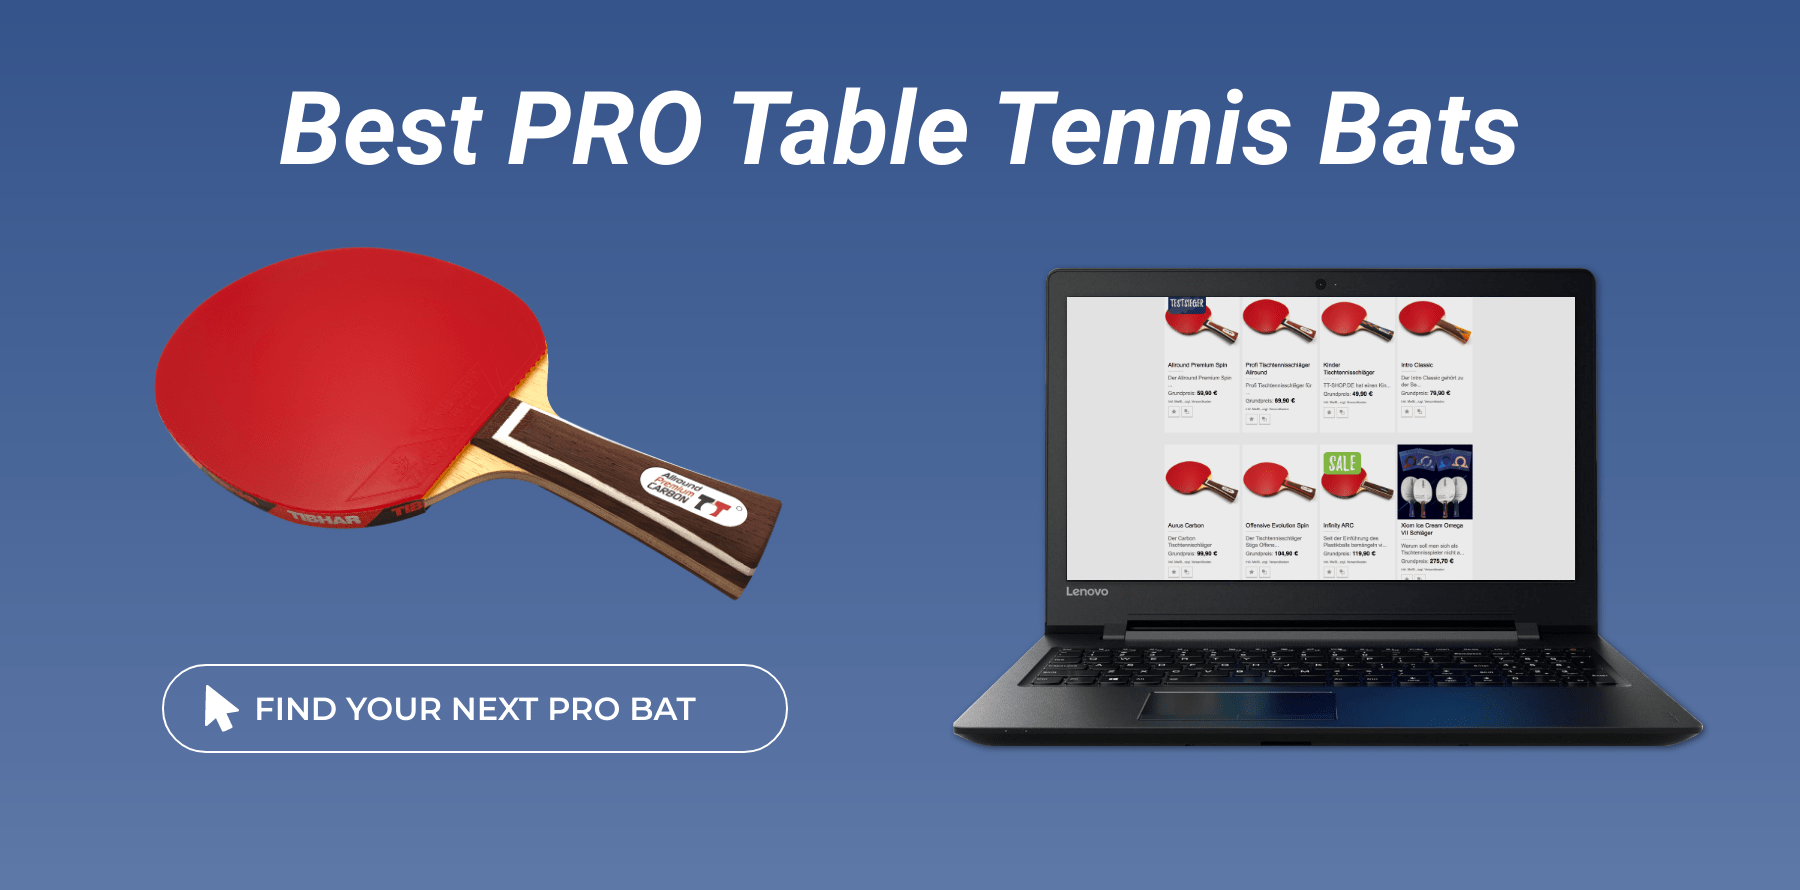 As a Table Tennis player, I can appreciate how much research the